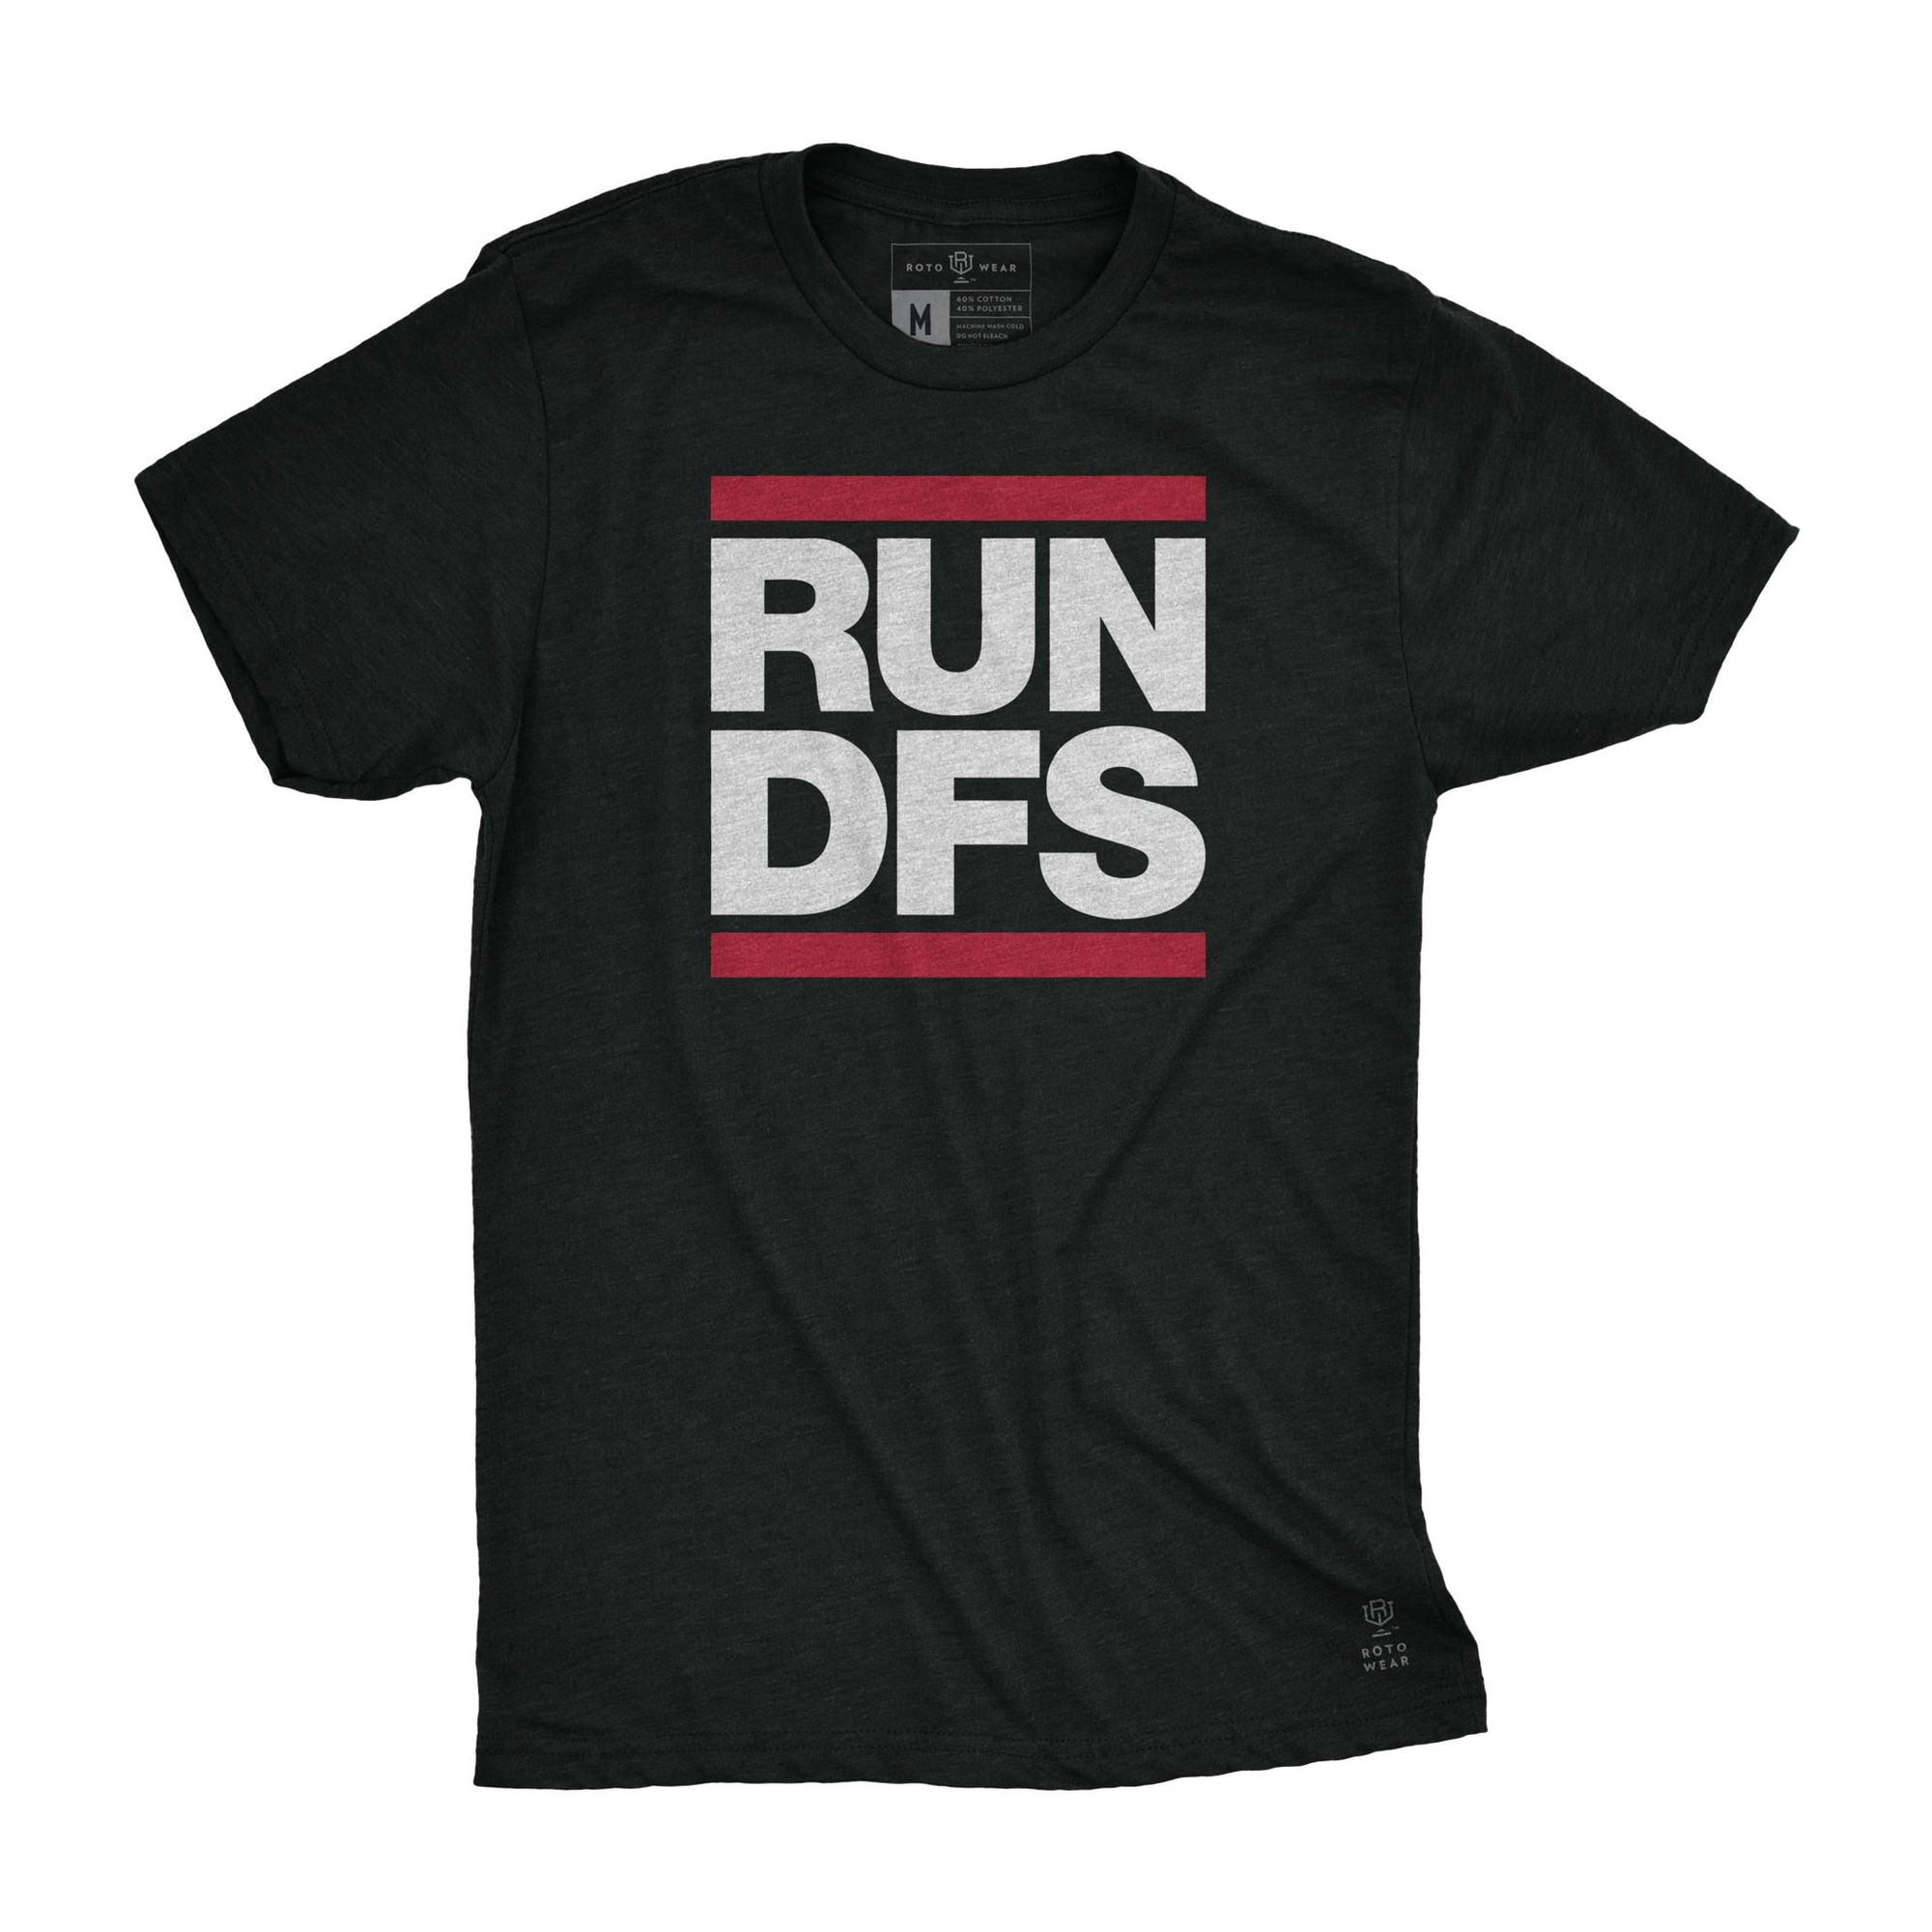 Run DFS men’s t-shirt by RotoWear for daily fantasy DraftKings and Fanduel players, fantasy football, fantasy baseball, fantasy hockey and fantasy basketball managers